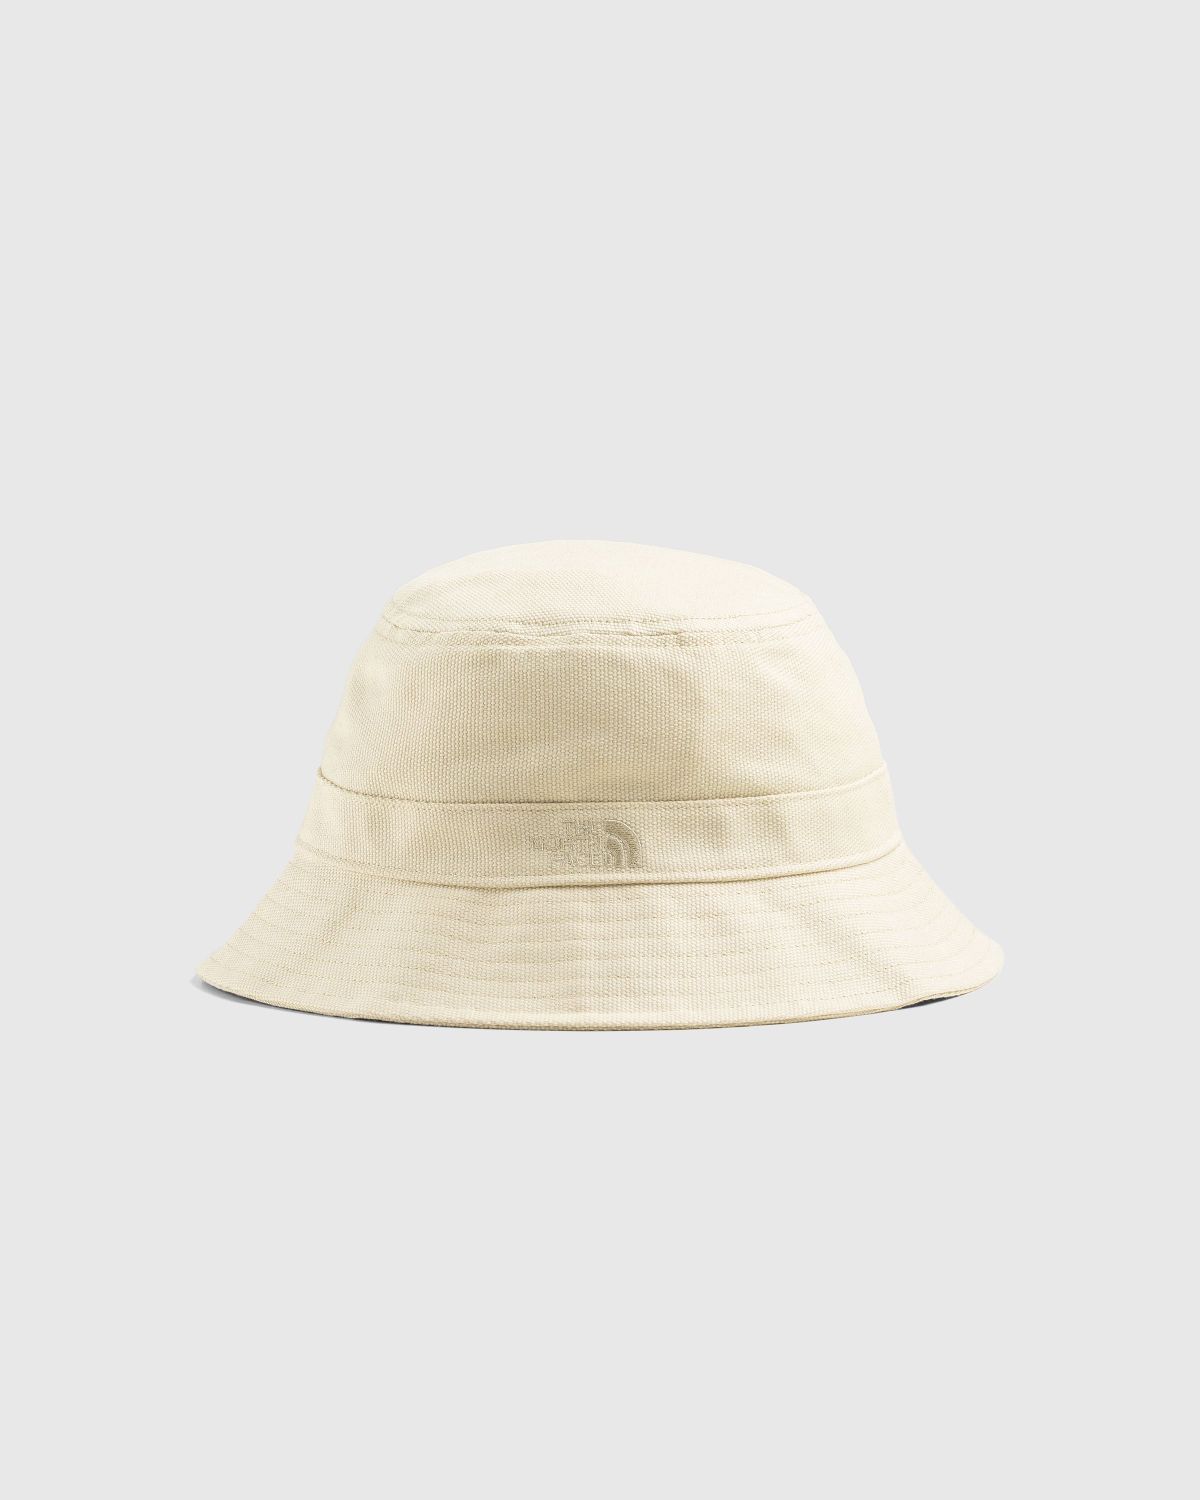 The North Face – Mountain Bucket Hat Gravel - Hats - Colorway - Image 1